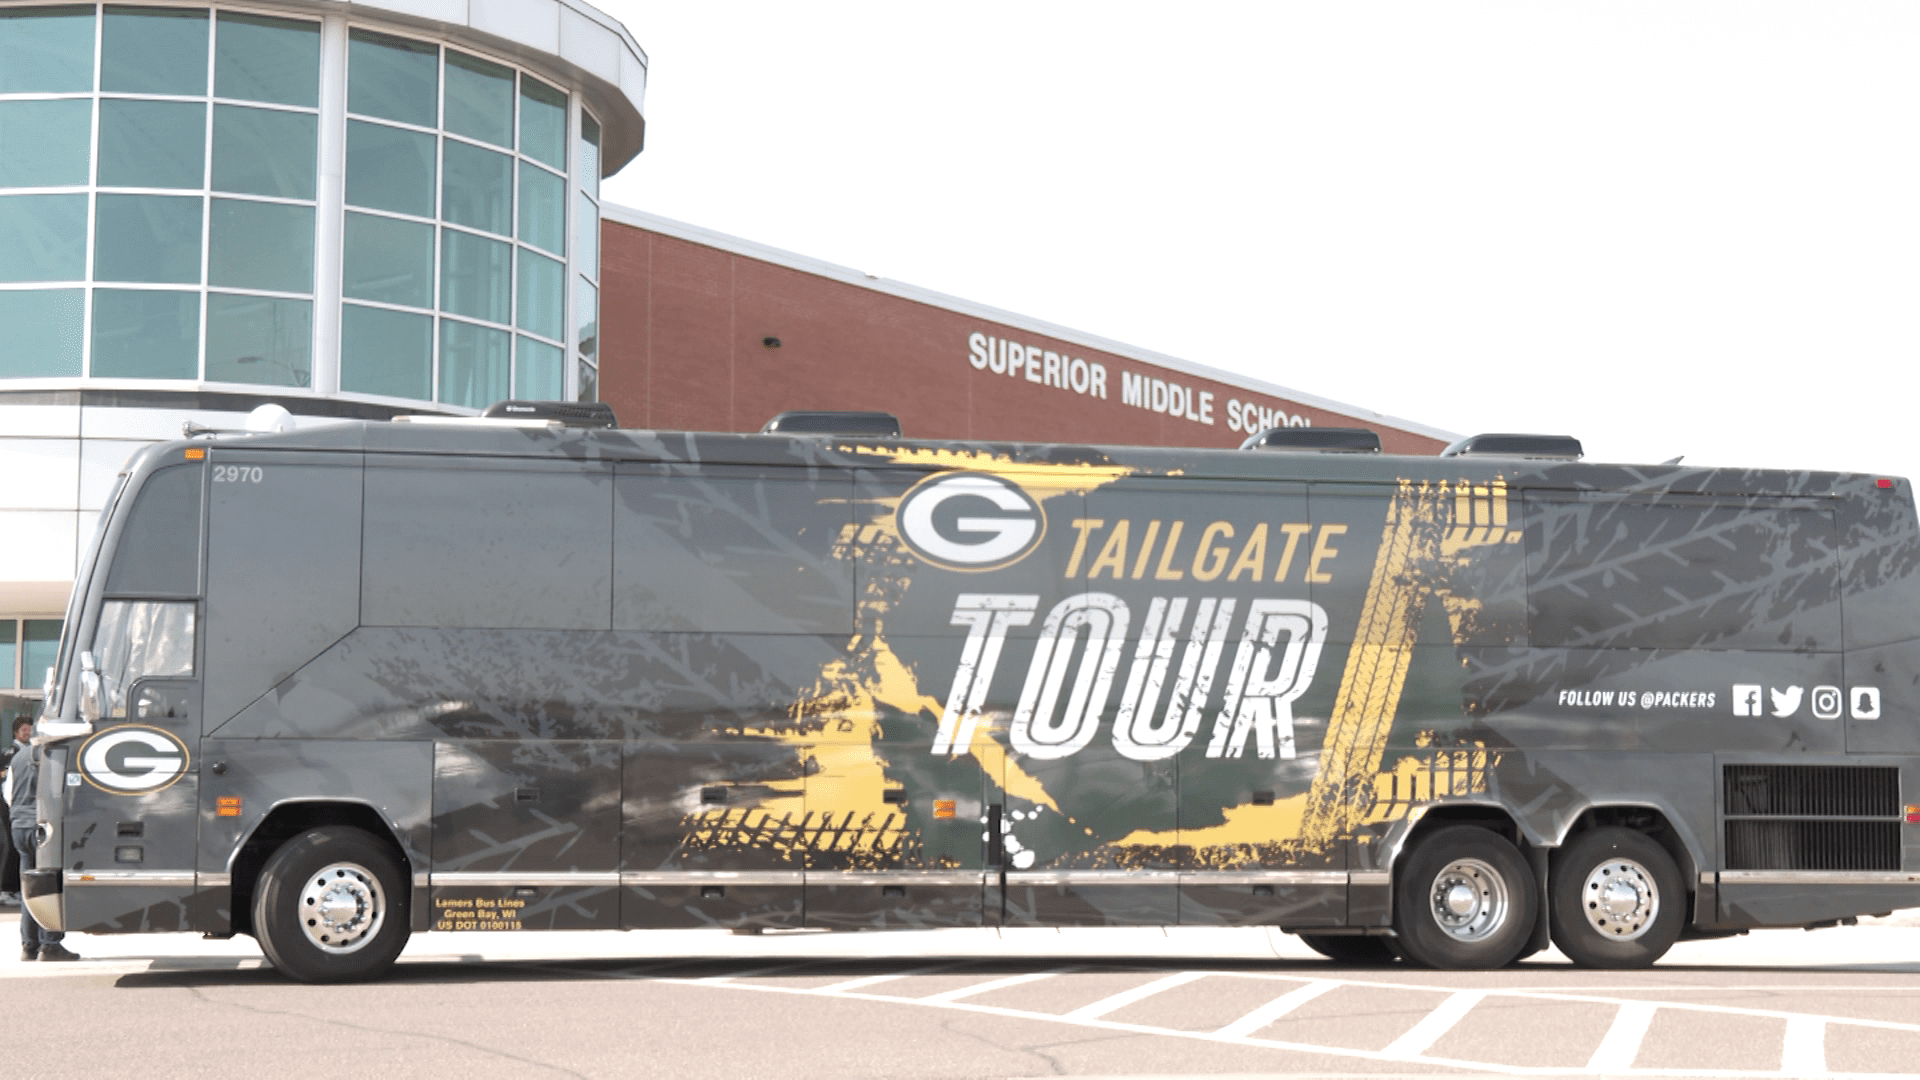 A Green Bay Packers-themed tour bus rolled into Superior to meet Packer fans - WDIO.com – With you for life